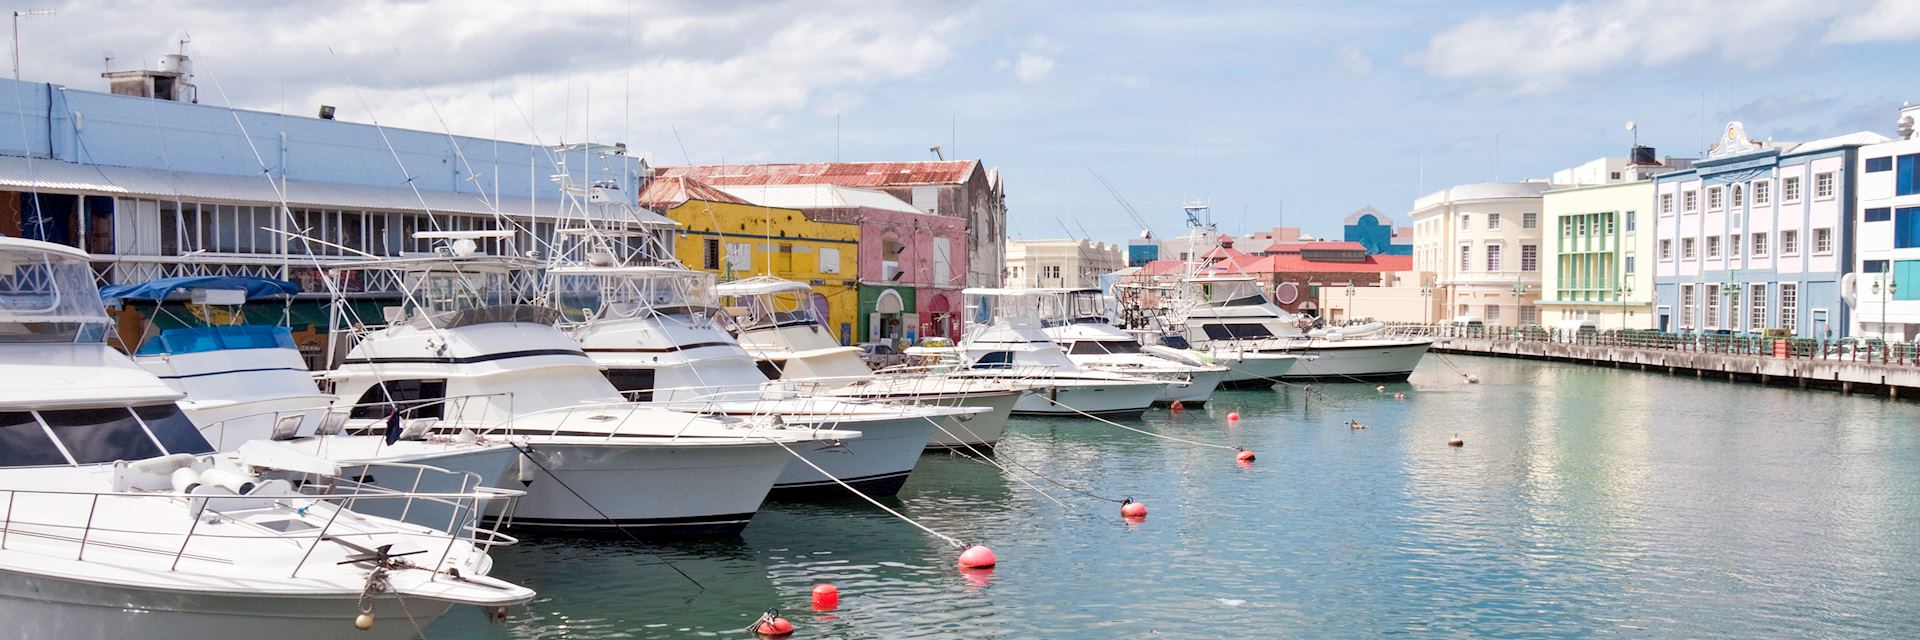 Bridgetown Travel Guide - Expert Picks for your Vacation